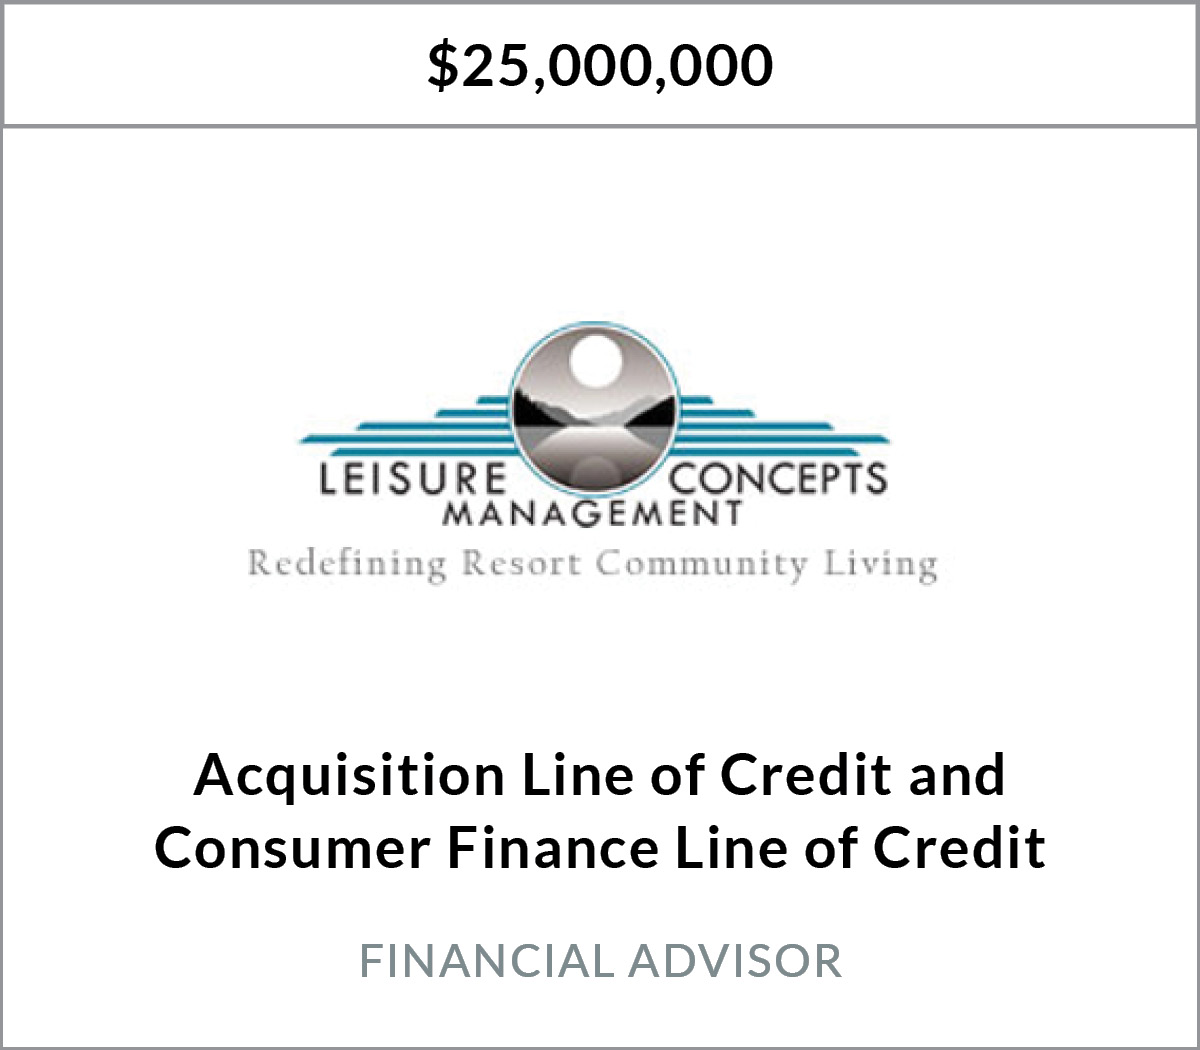 Leisure Concepts Management Receives Financing Commitment